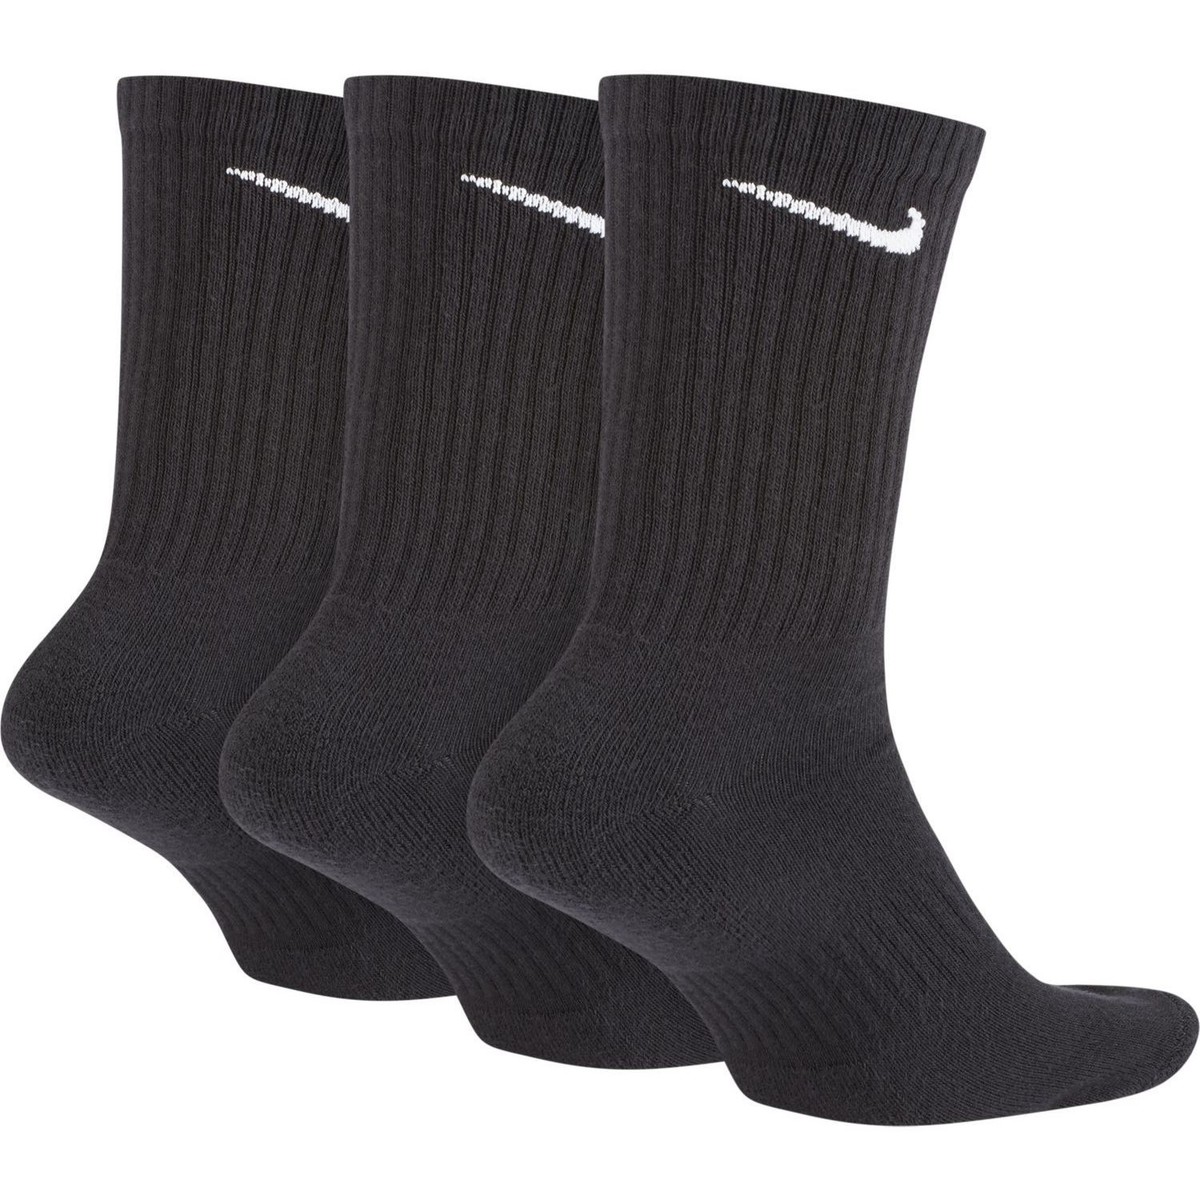 Nike Noir Chaussettes Everyday Cushioned 3 Paires trYAQGUm